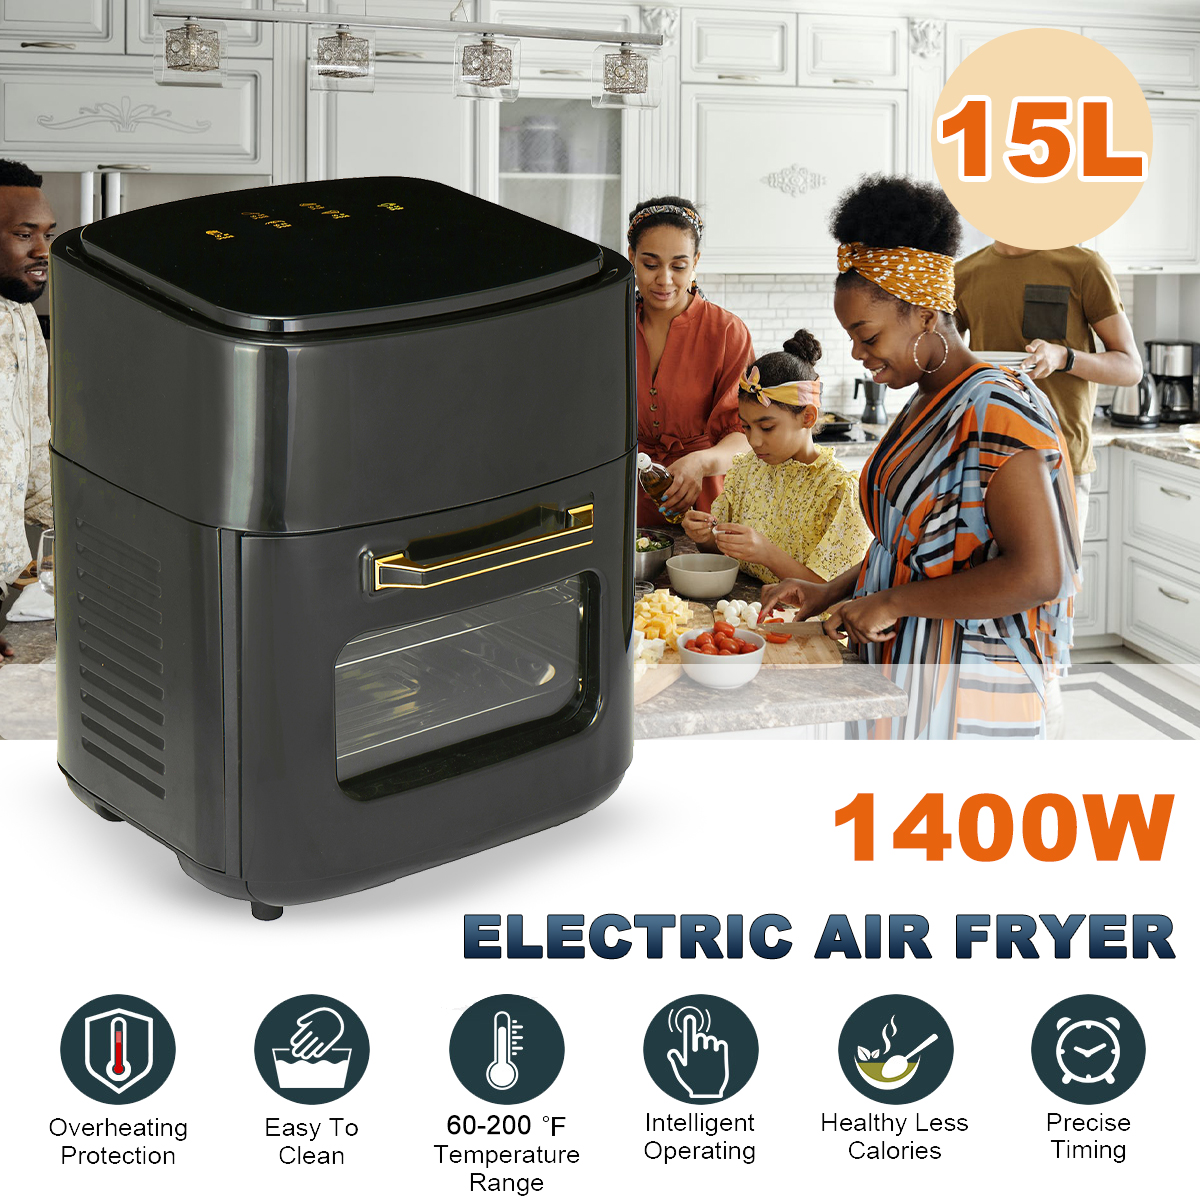 AF5-1400W-220V-15L-Air-Fryer-360deg-Surround-Heating-Digital-LCD-Display-Hot-Oven-Cooker-with-Remova-1925368-1